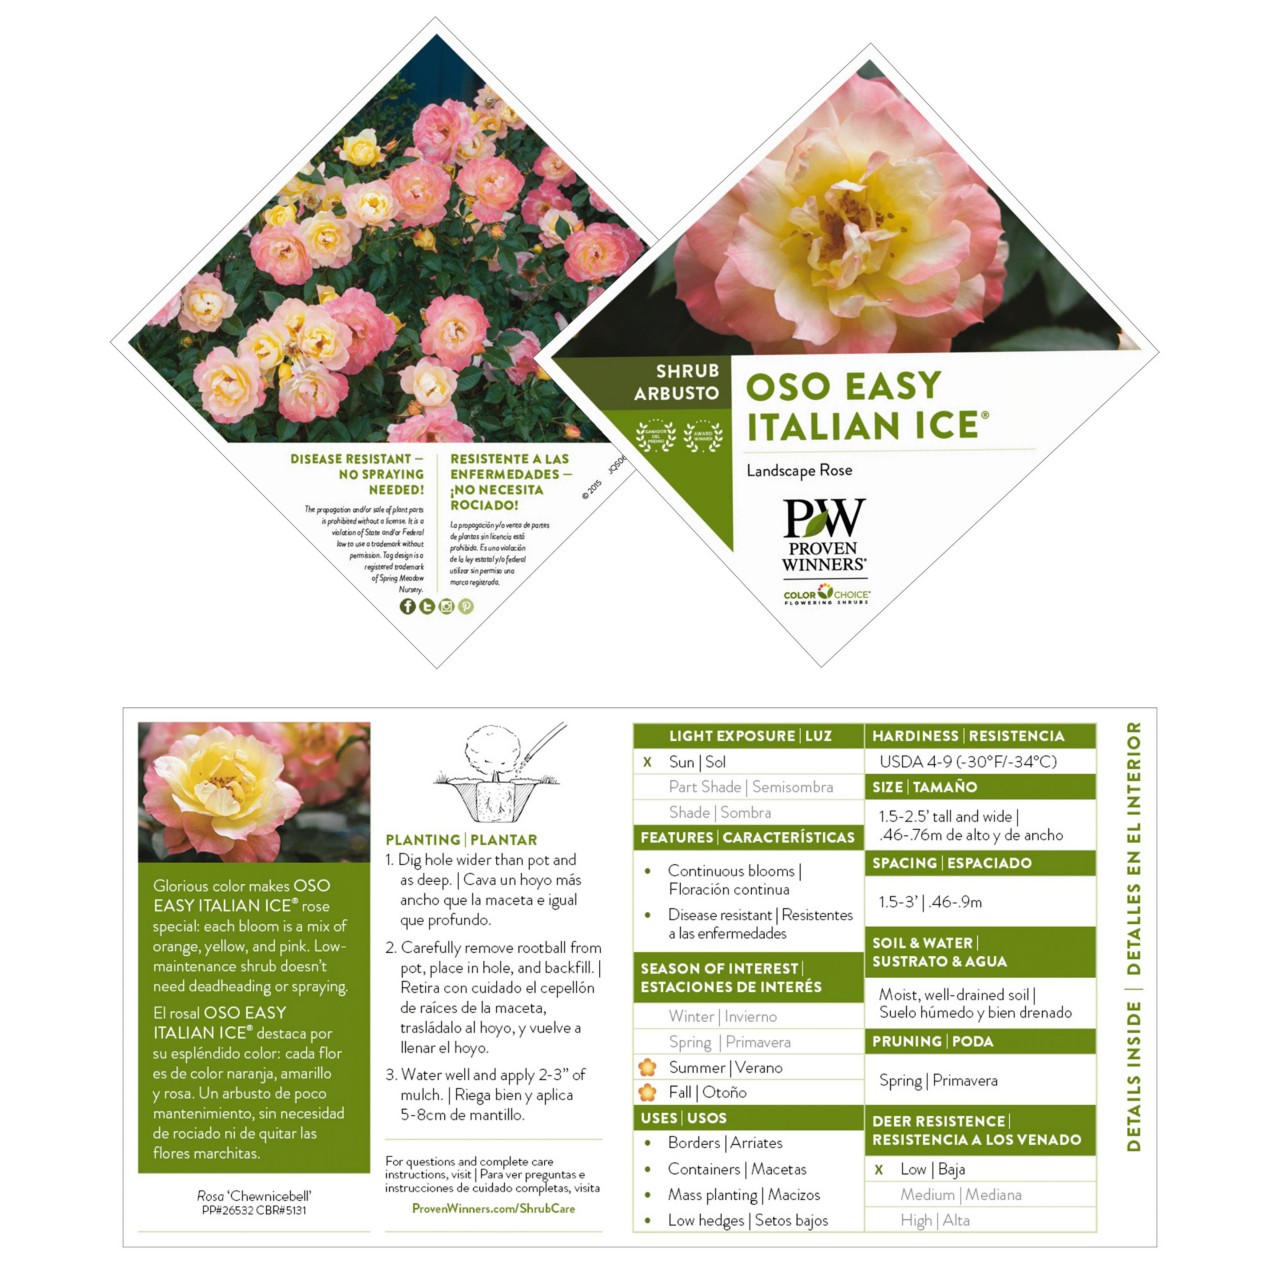 Image of a plant tag for a landscape rose.